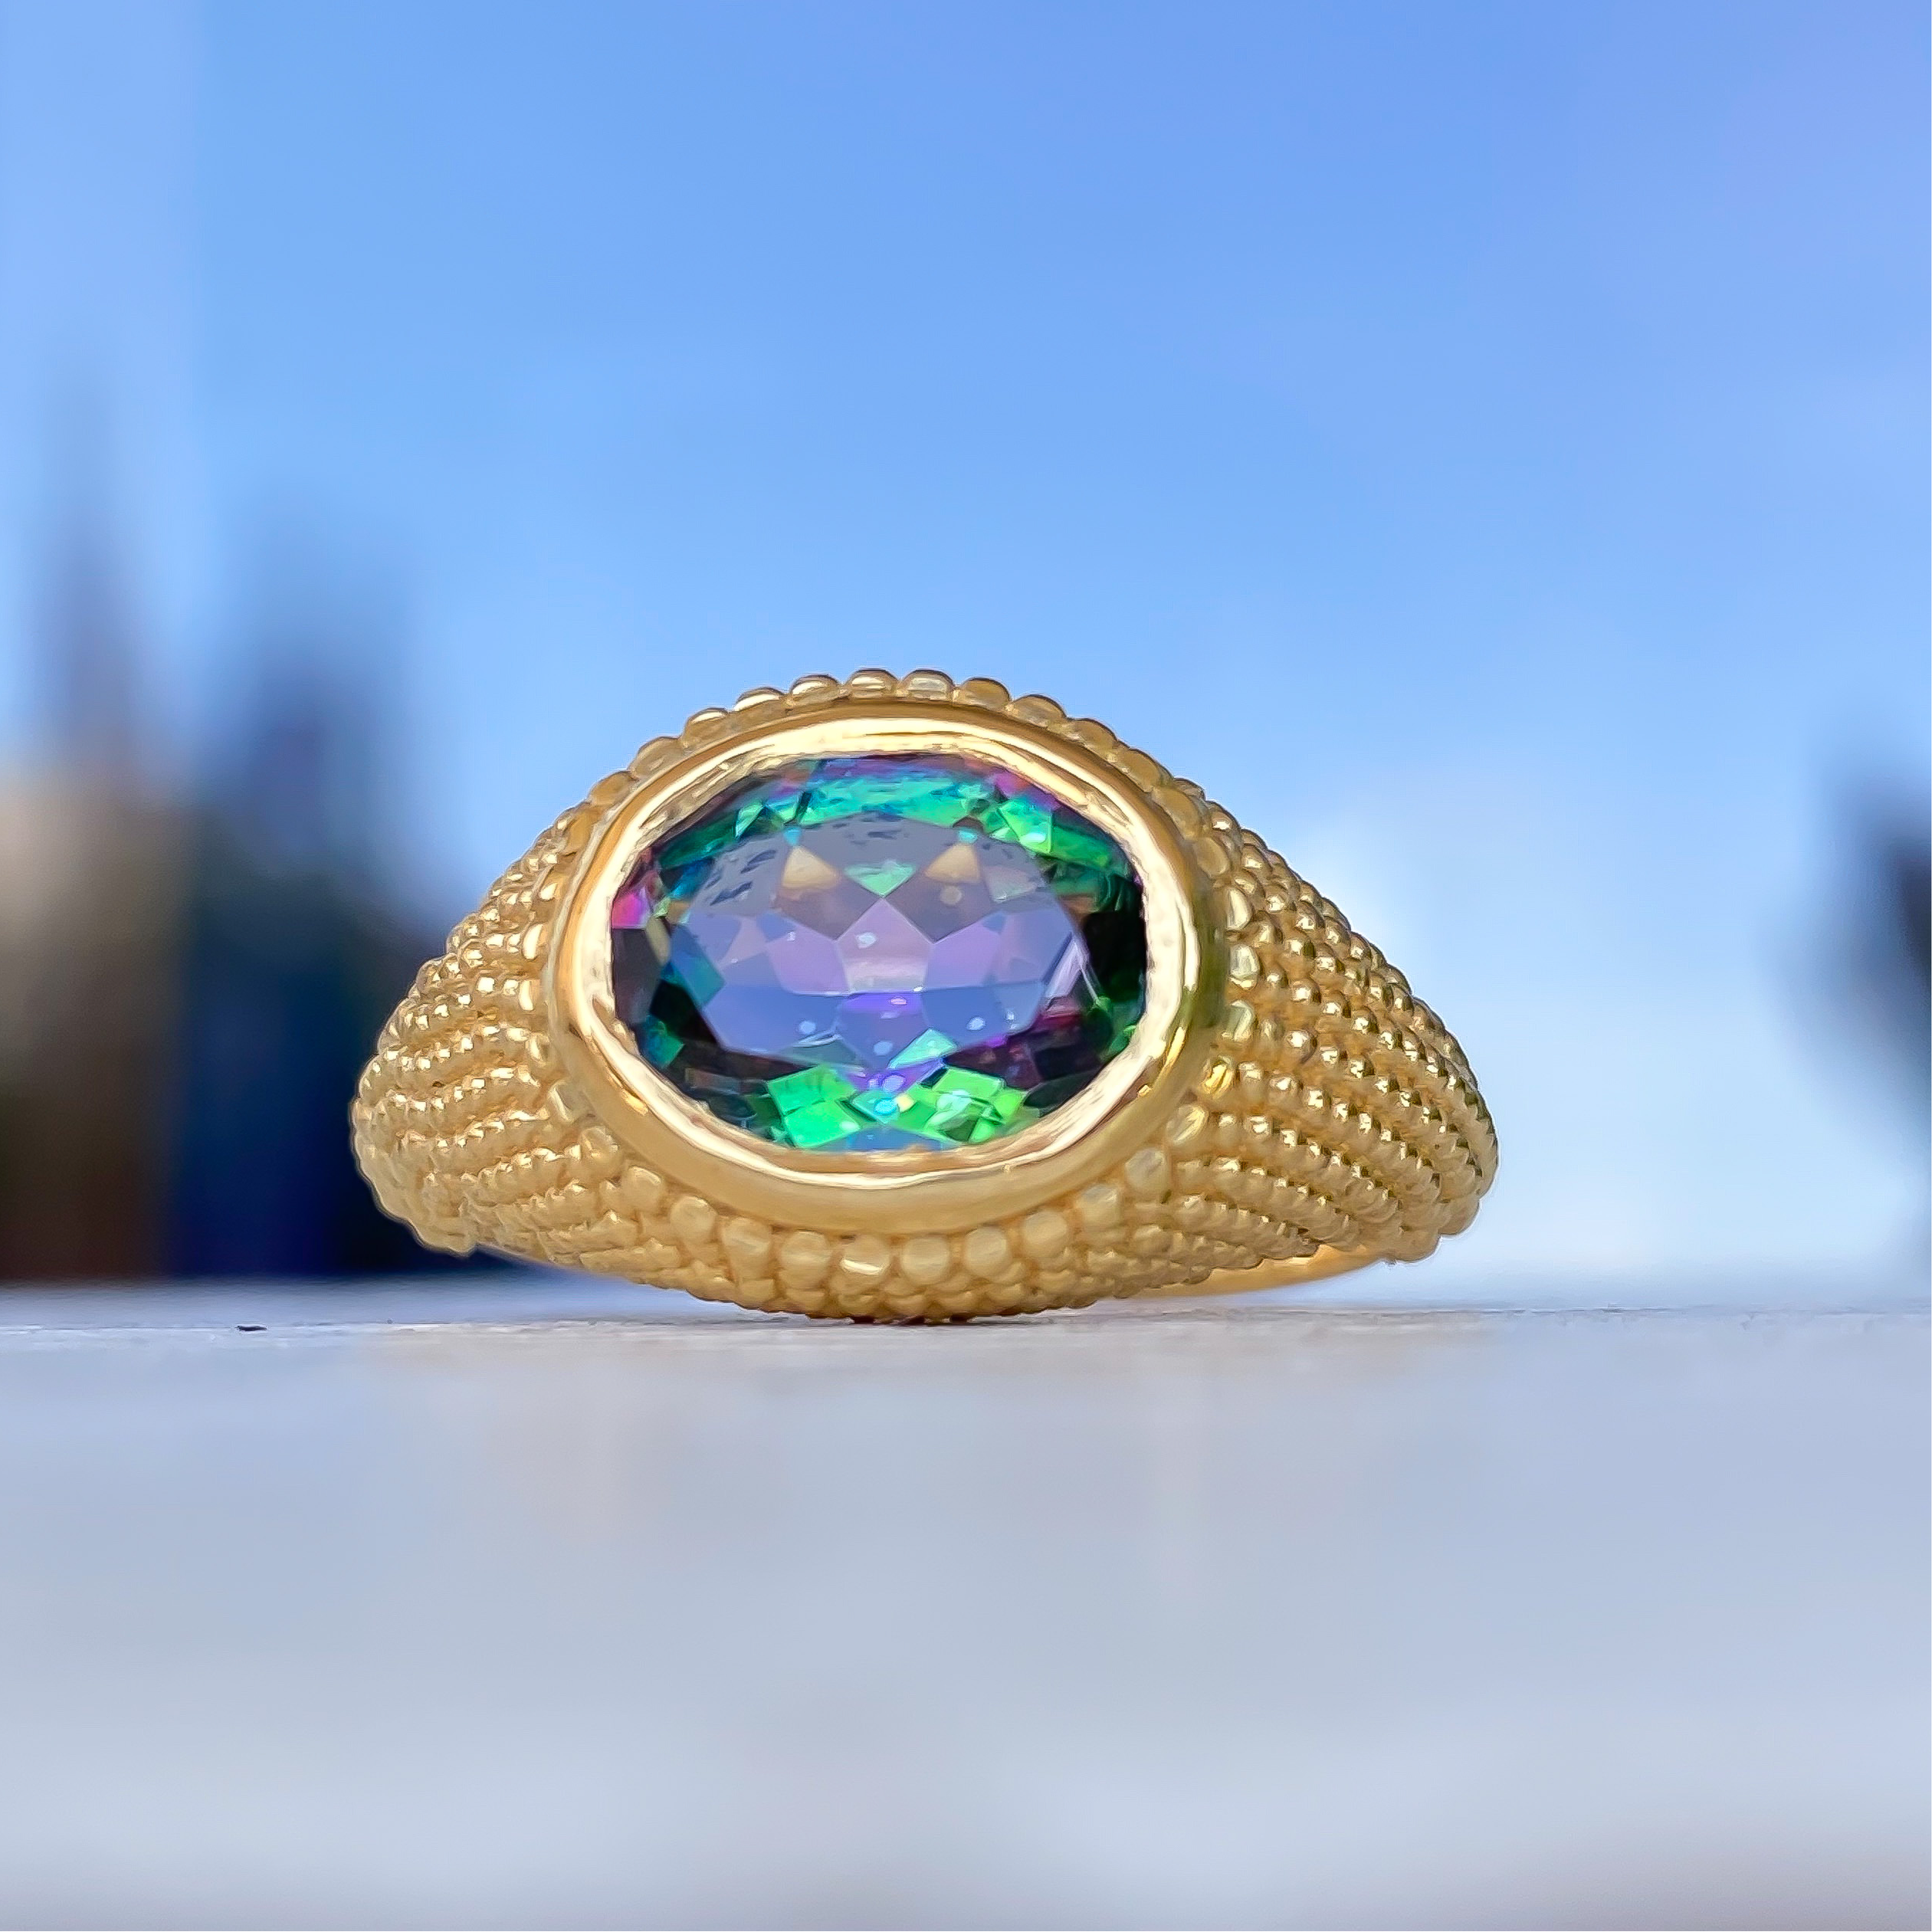 Bijouteries Lavigueur | 10K GOLD RING WITH MYSTIC TOPAZ